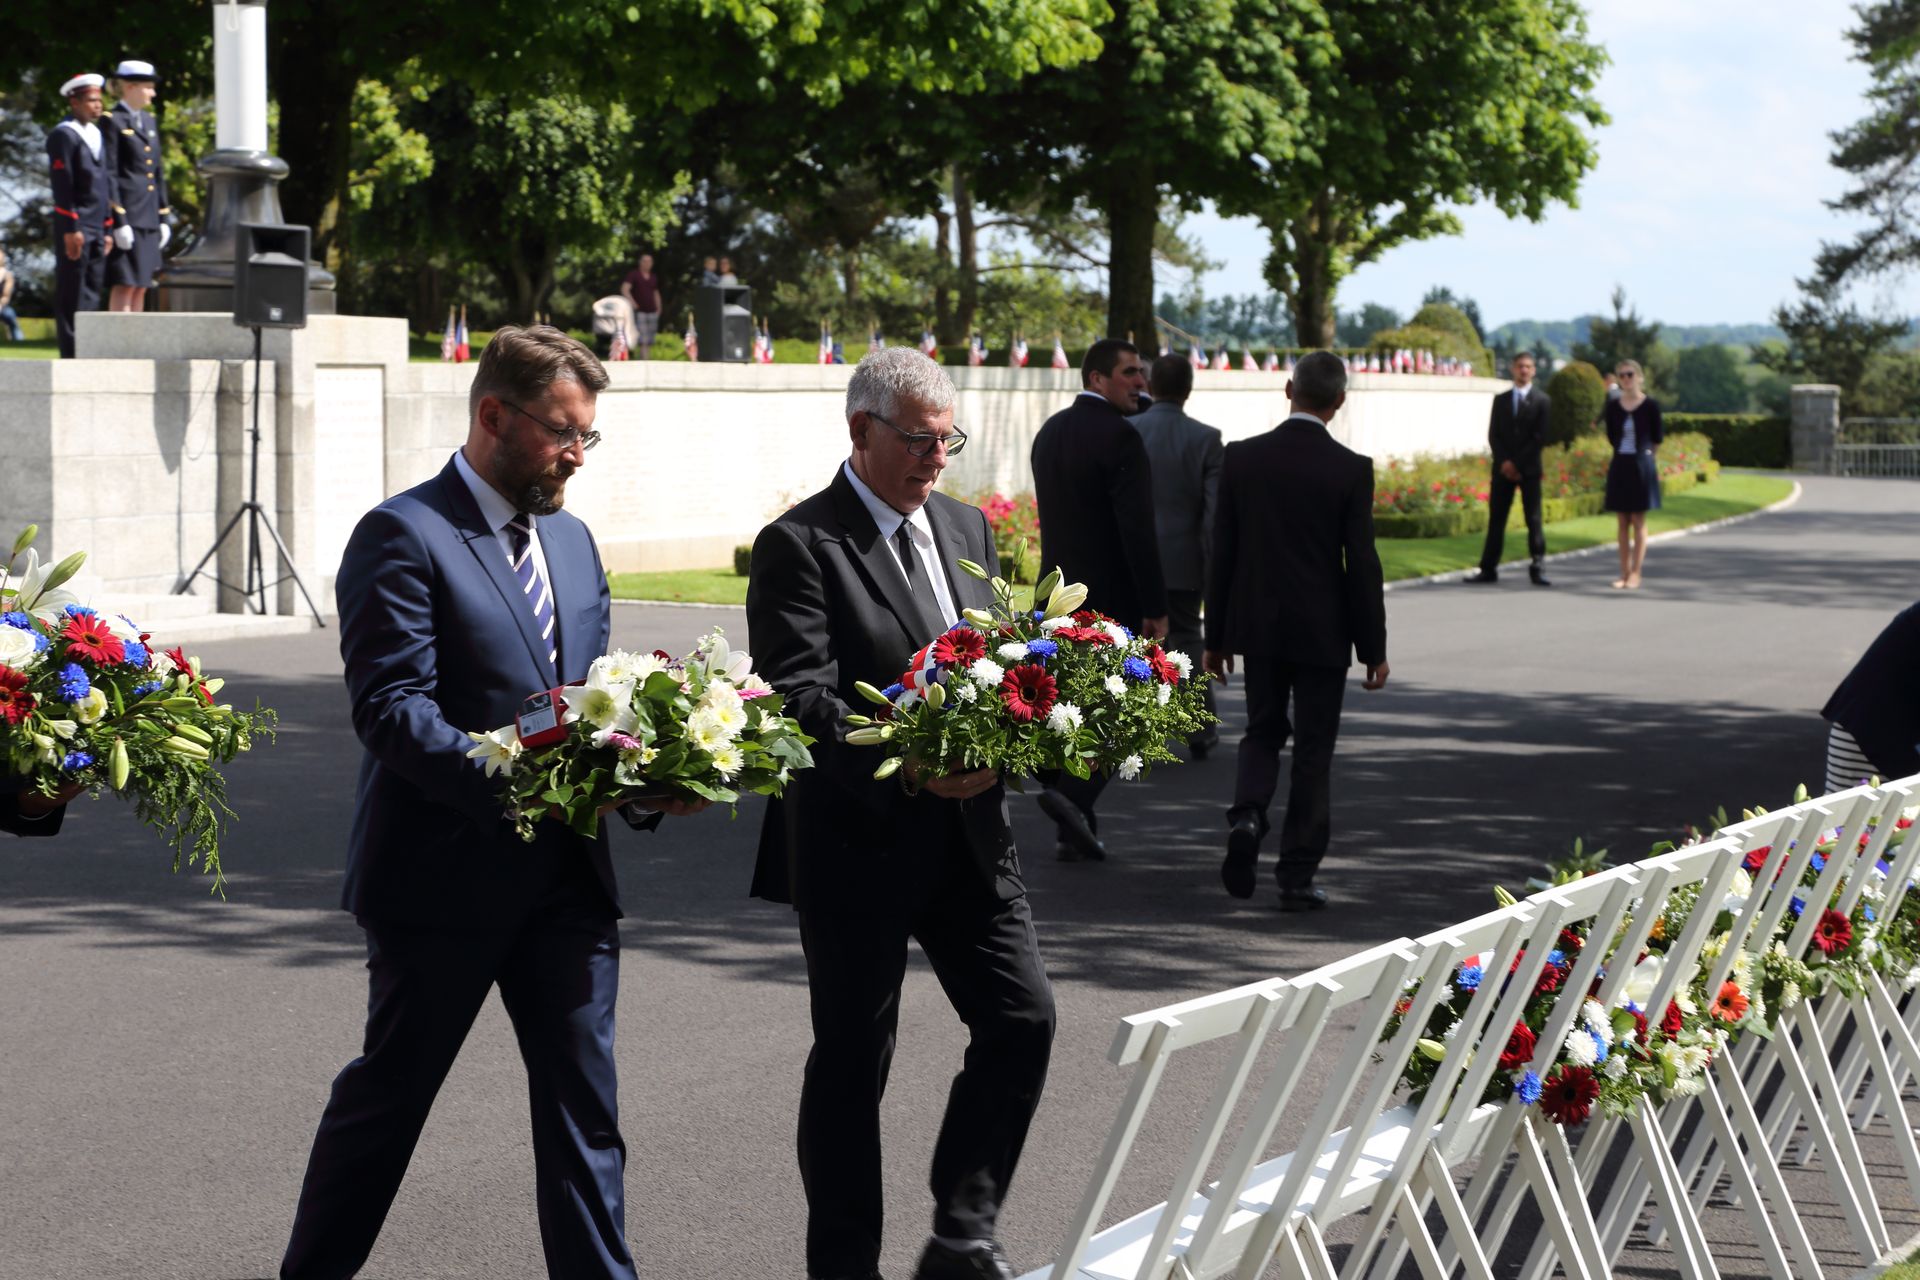 Two men carry floral wreaths to be laid. 